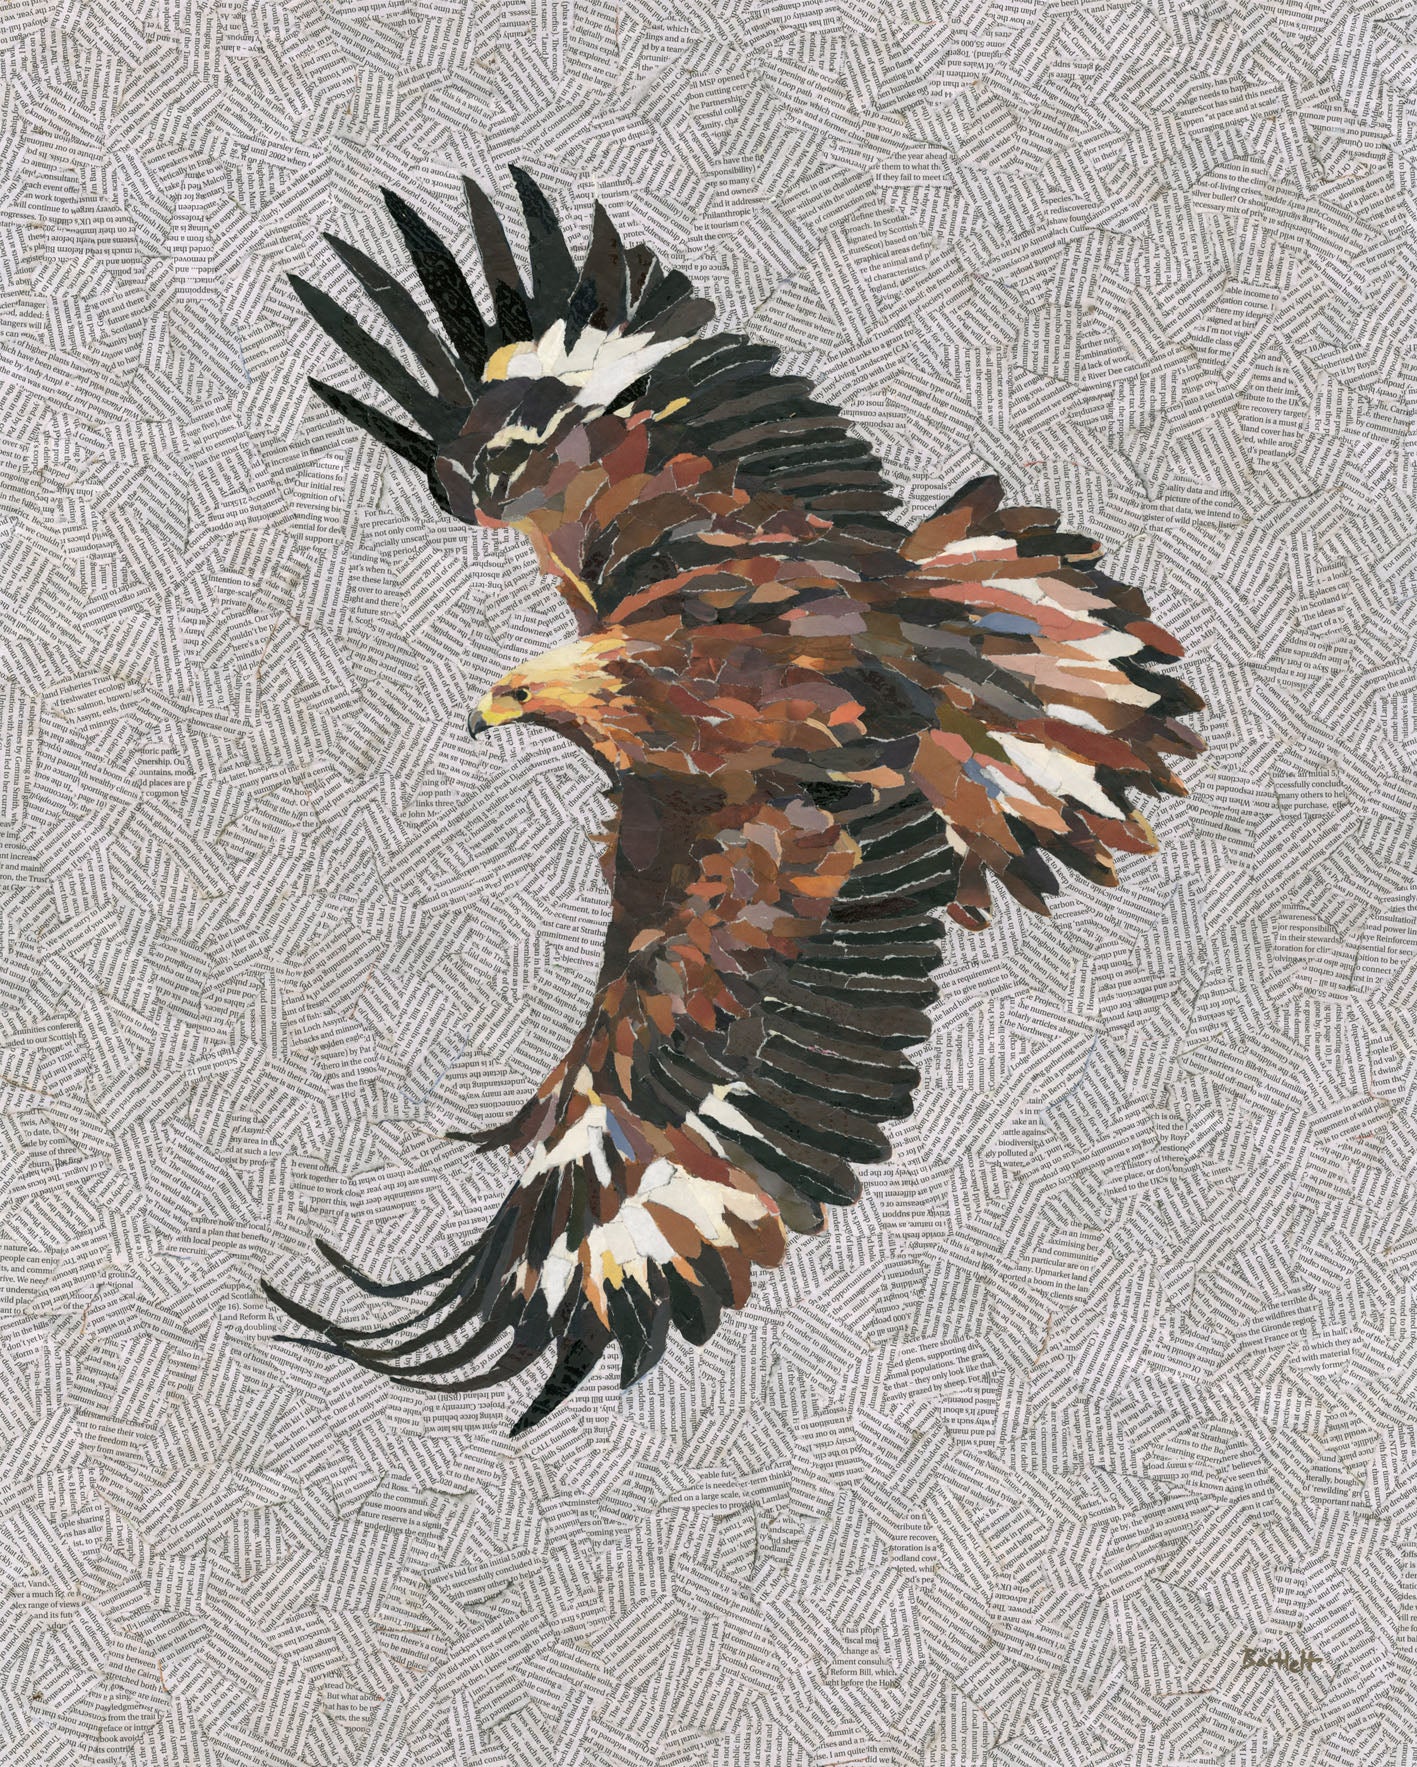 Limited edition Eagle print by Paul Bartlett